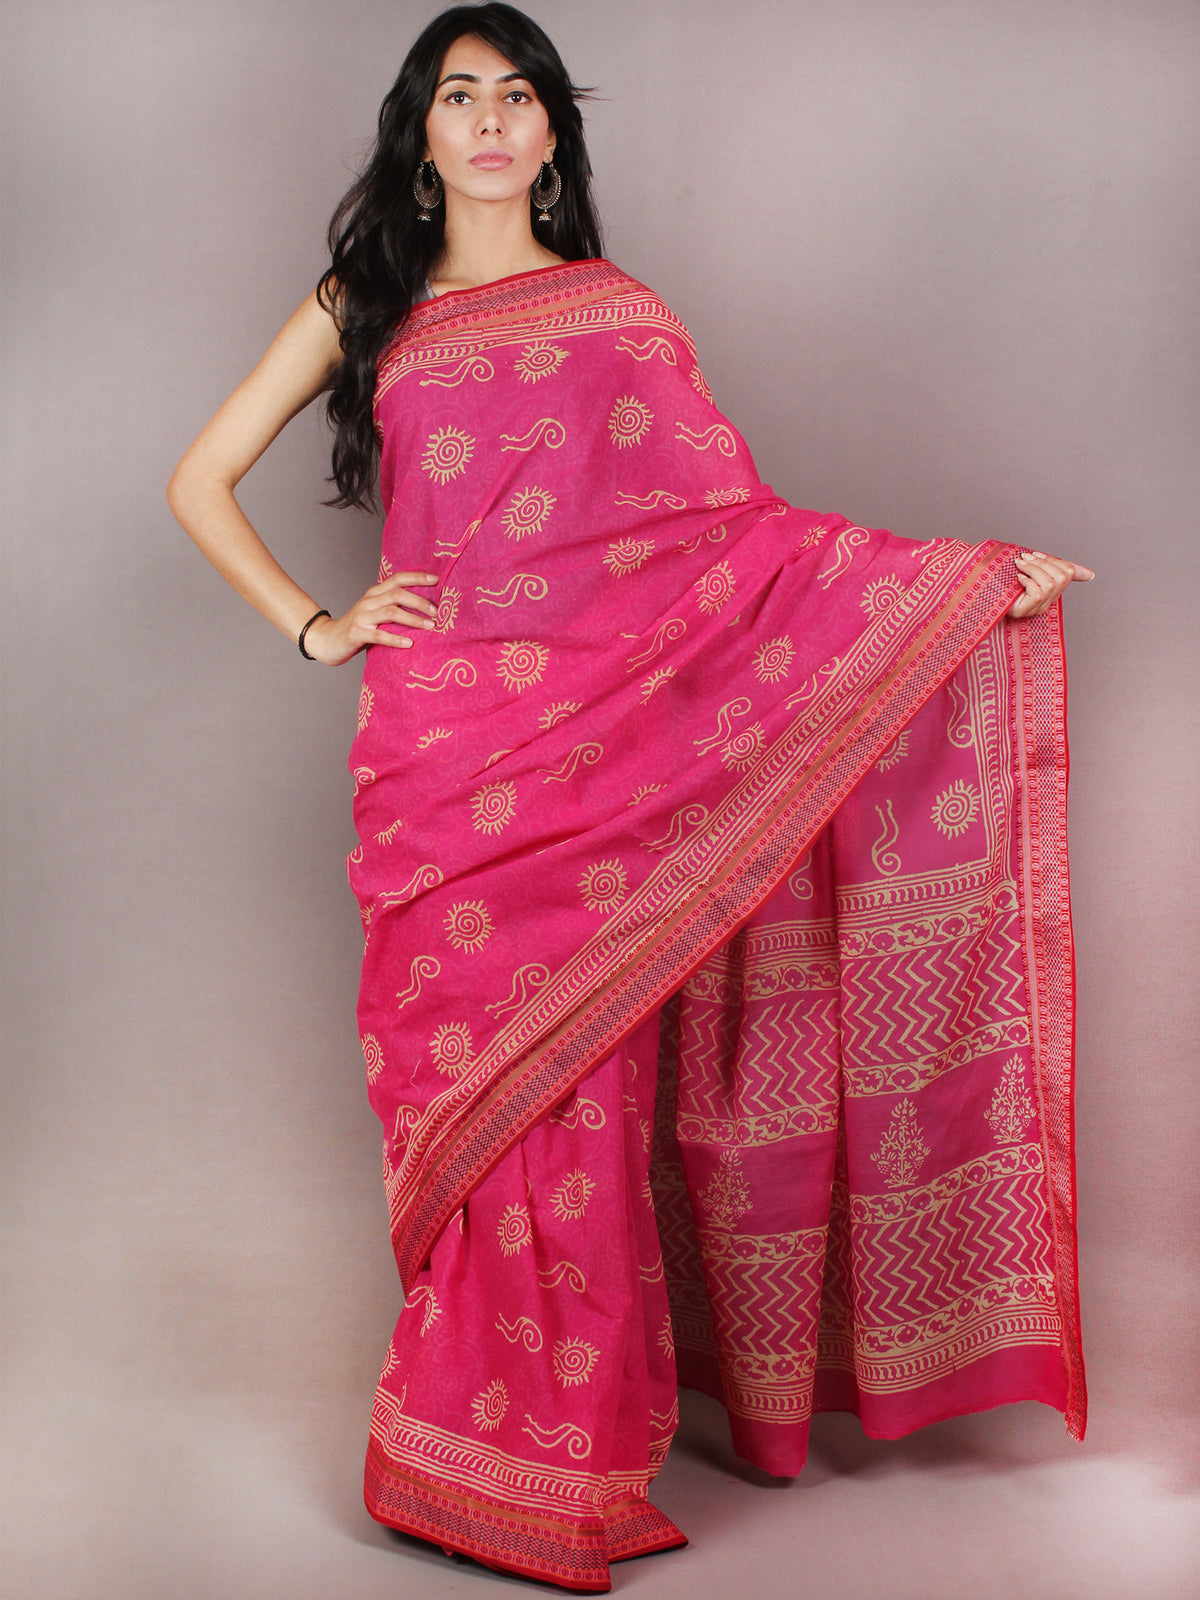 Pink Beige Hand Block Printed in Natural Colors Cotton Mul Saree With Resham Border - S03170705